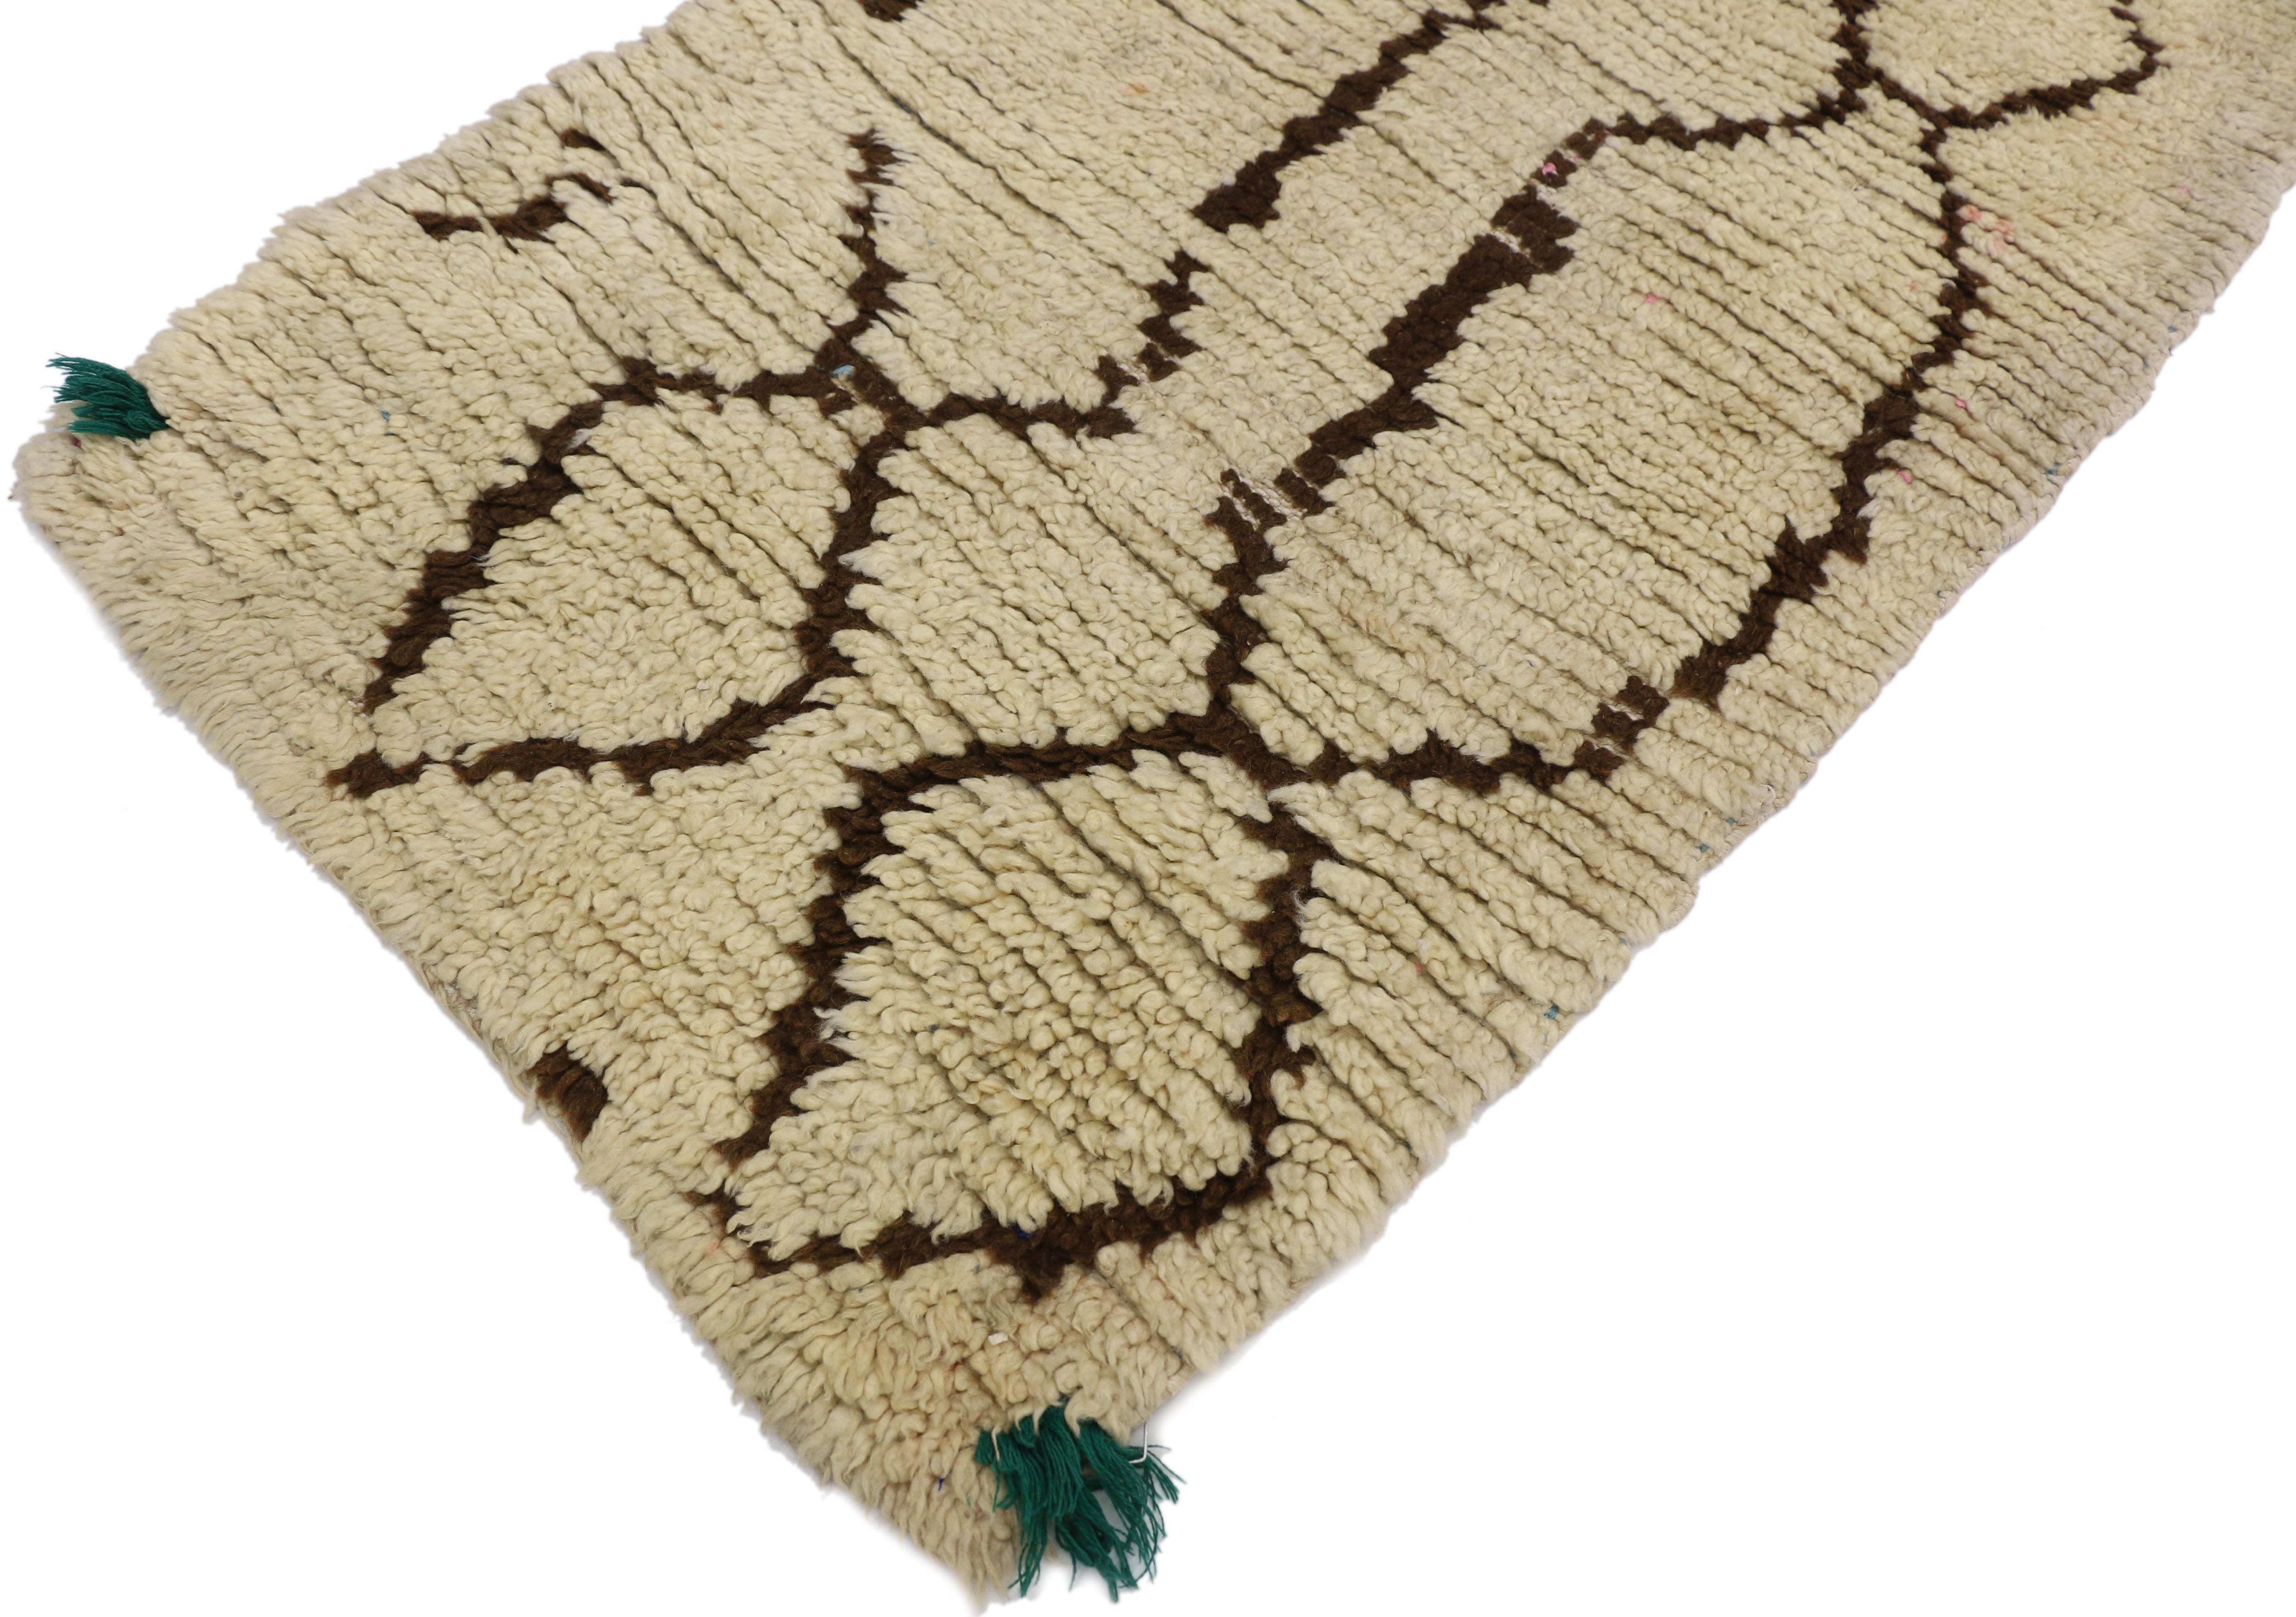 20877, vintage Berber Boucherouite Moroccan Azilal rug with Expressionist tribal style. This vintage Moroccan Azilal rug features a tribal design composed of coffee colored asymmetrical lines that crisscross to create diamonds, lozenges, and organic